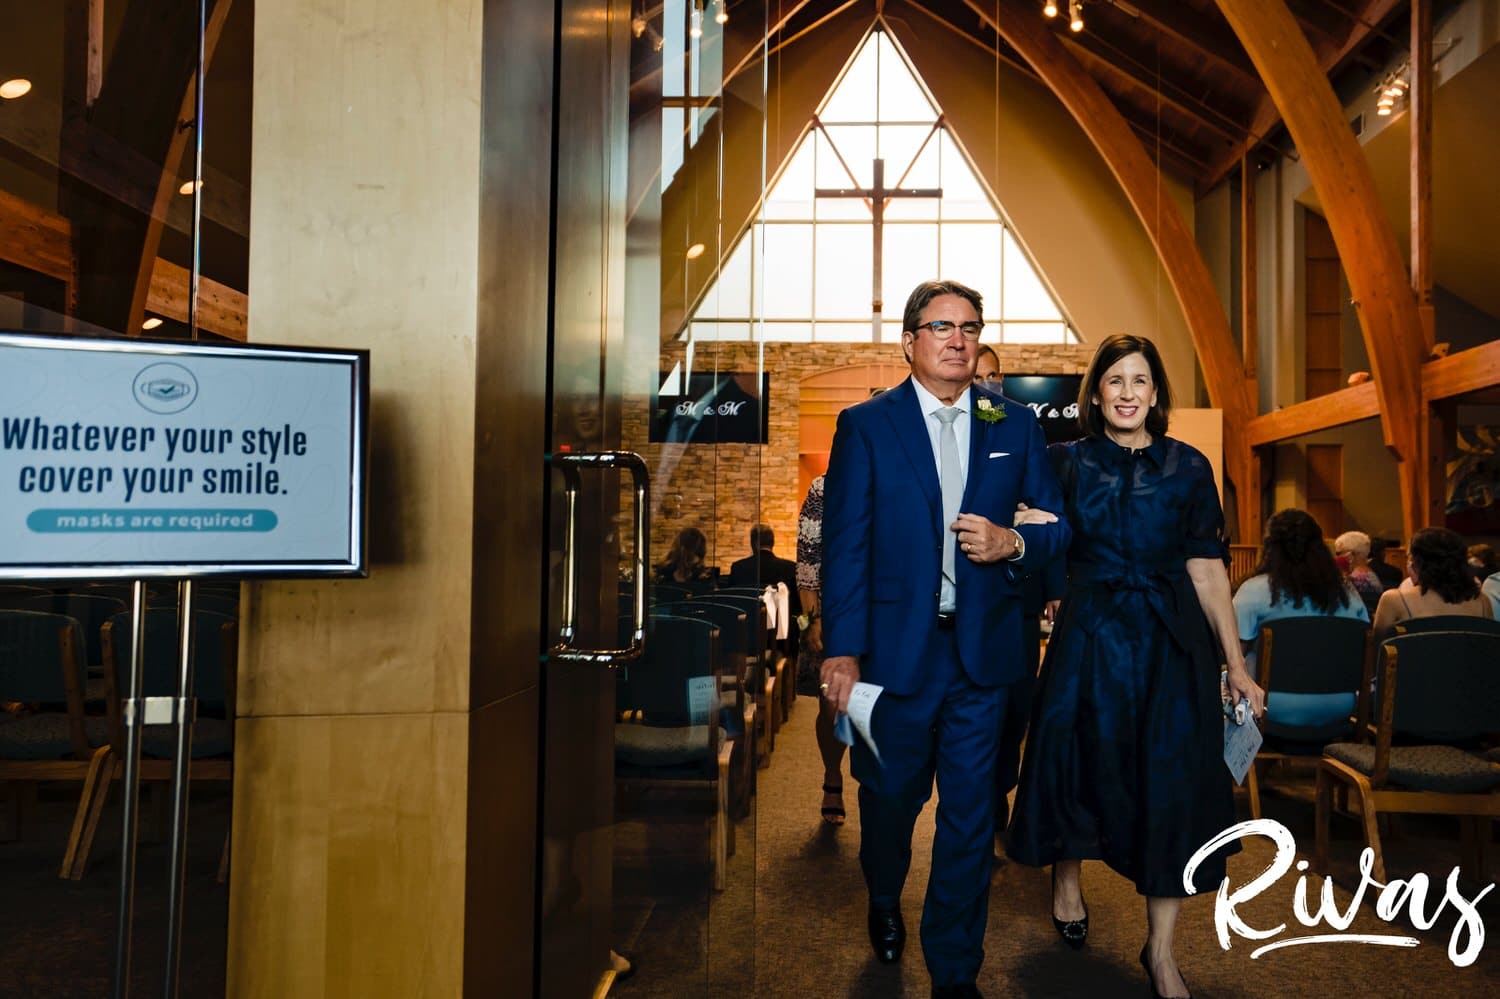 A candid picture of a groom's mom and dad exiting a wedding ceremony with a "wear a mask" sign right by the door. 